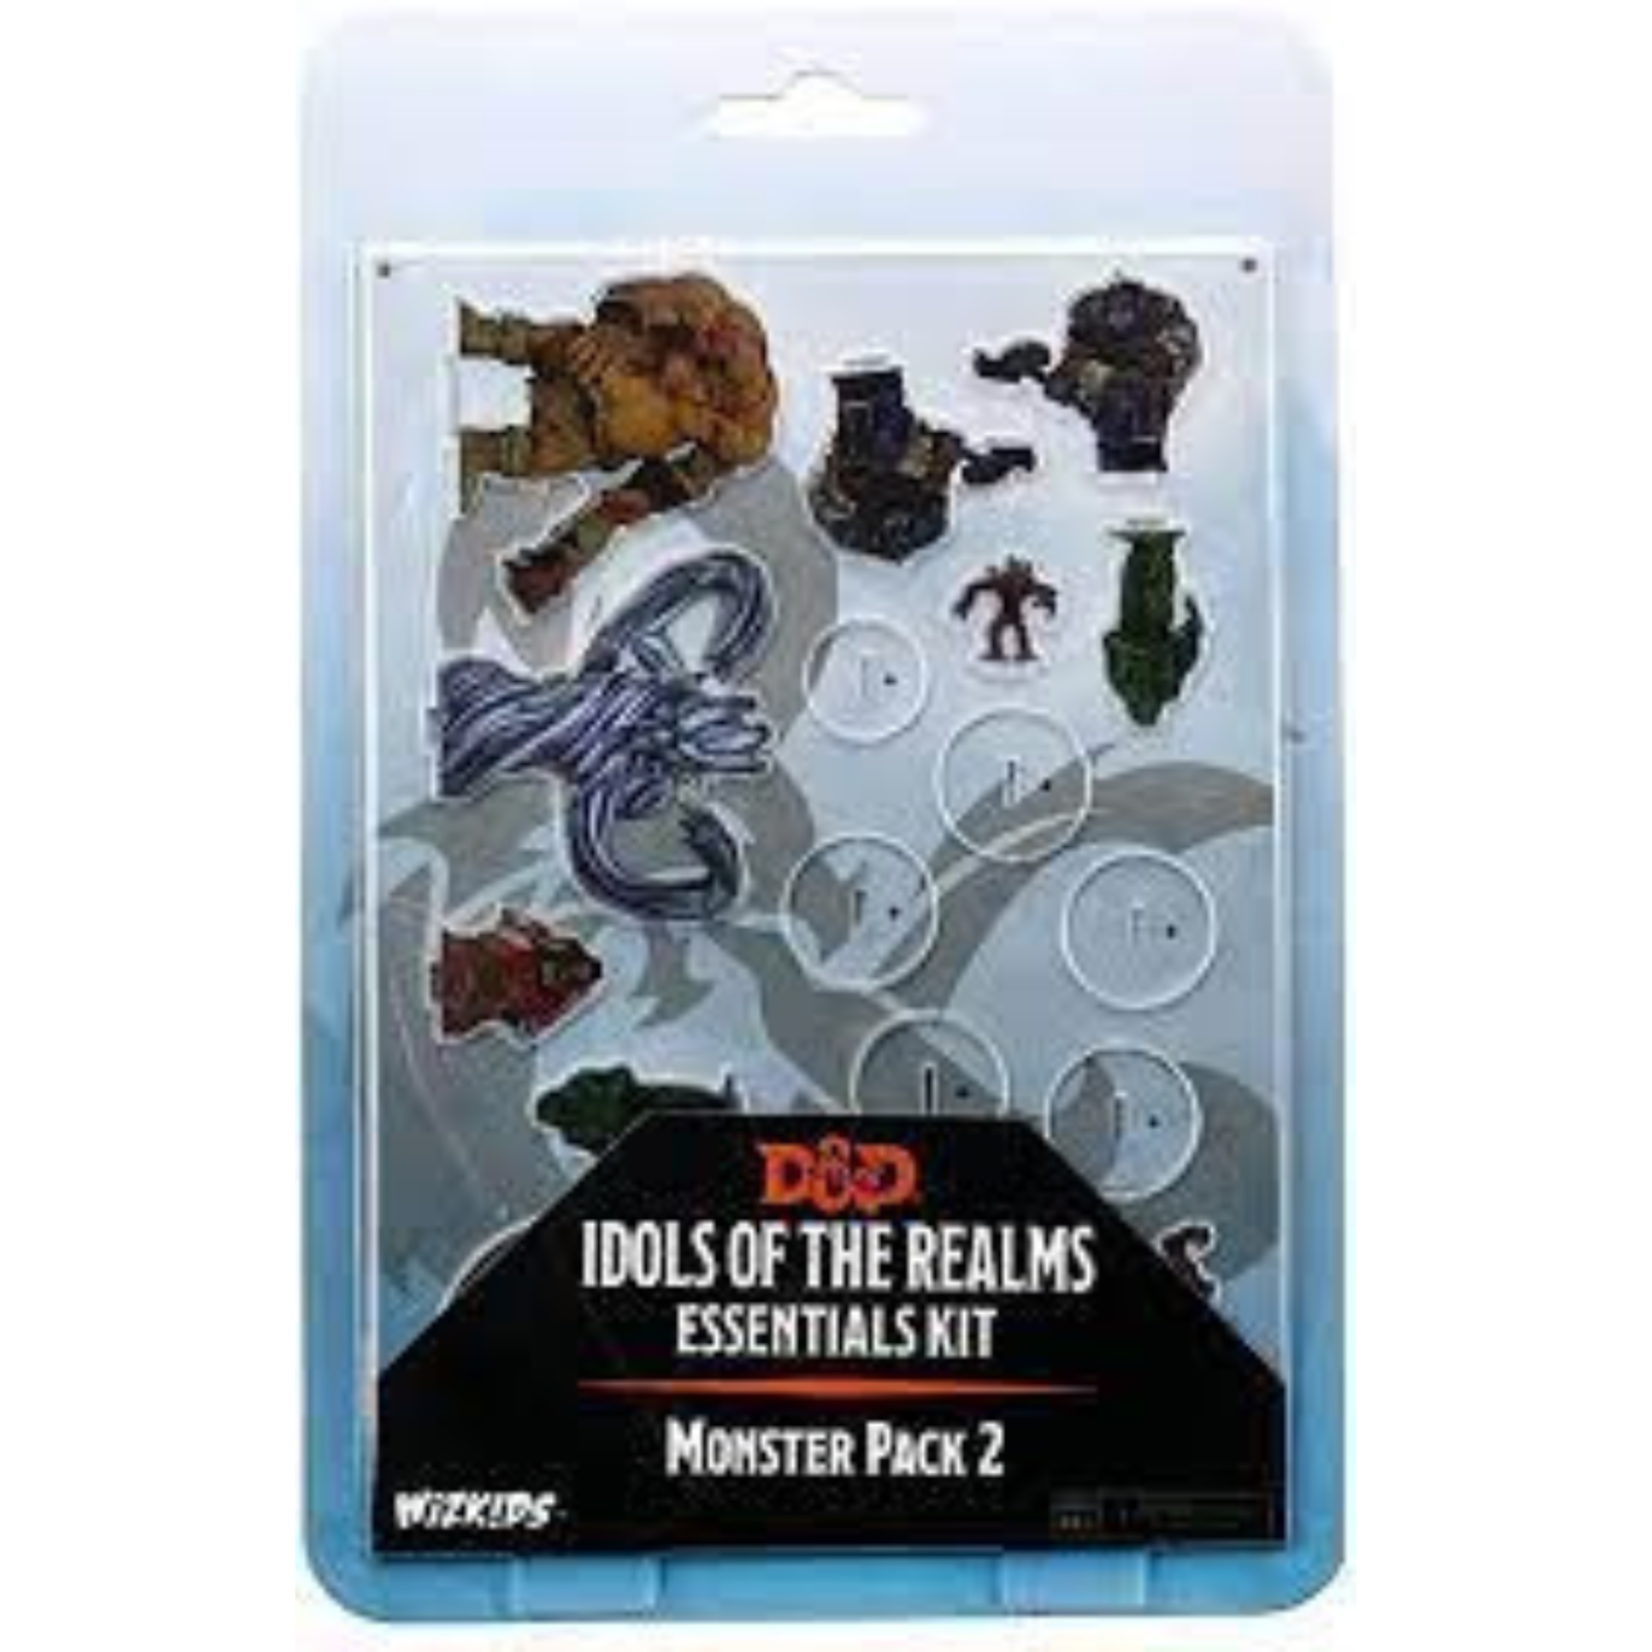 Idols of the Realms - Essentials Kit - Monster Pack #2